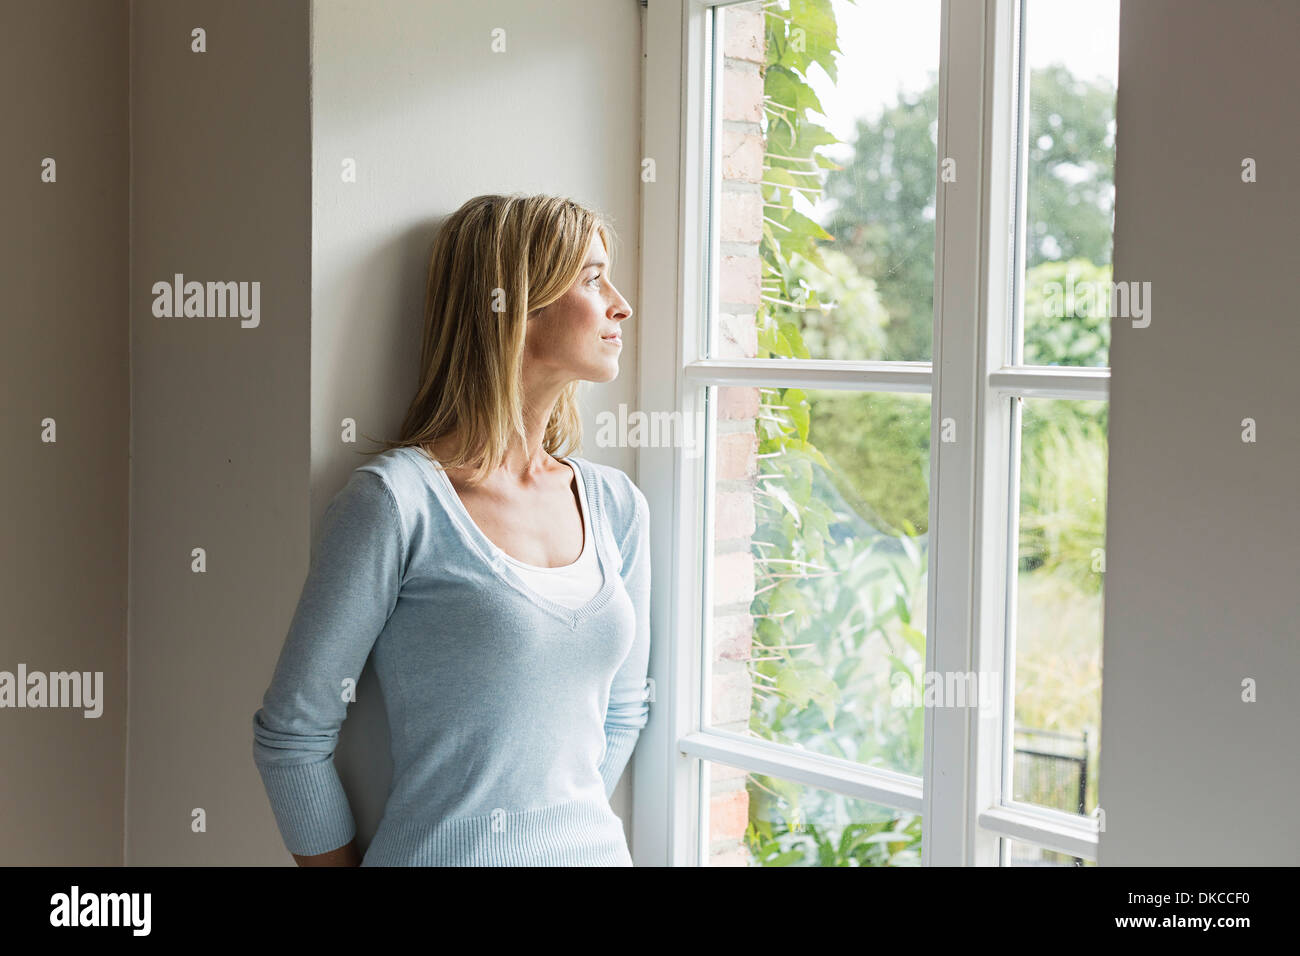 Portrait of mid adult woman looking out of window Banque D'Images